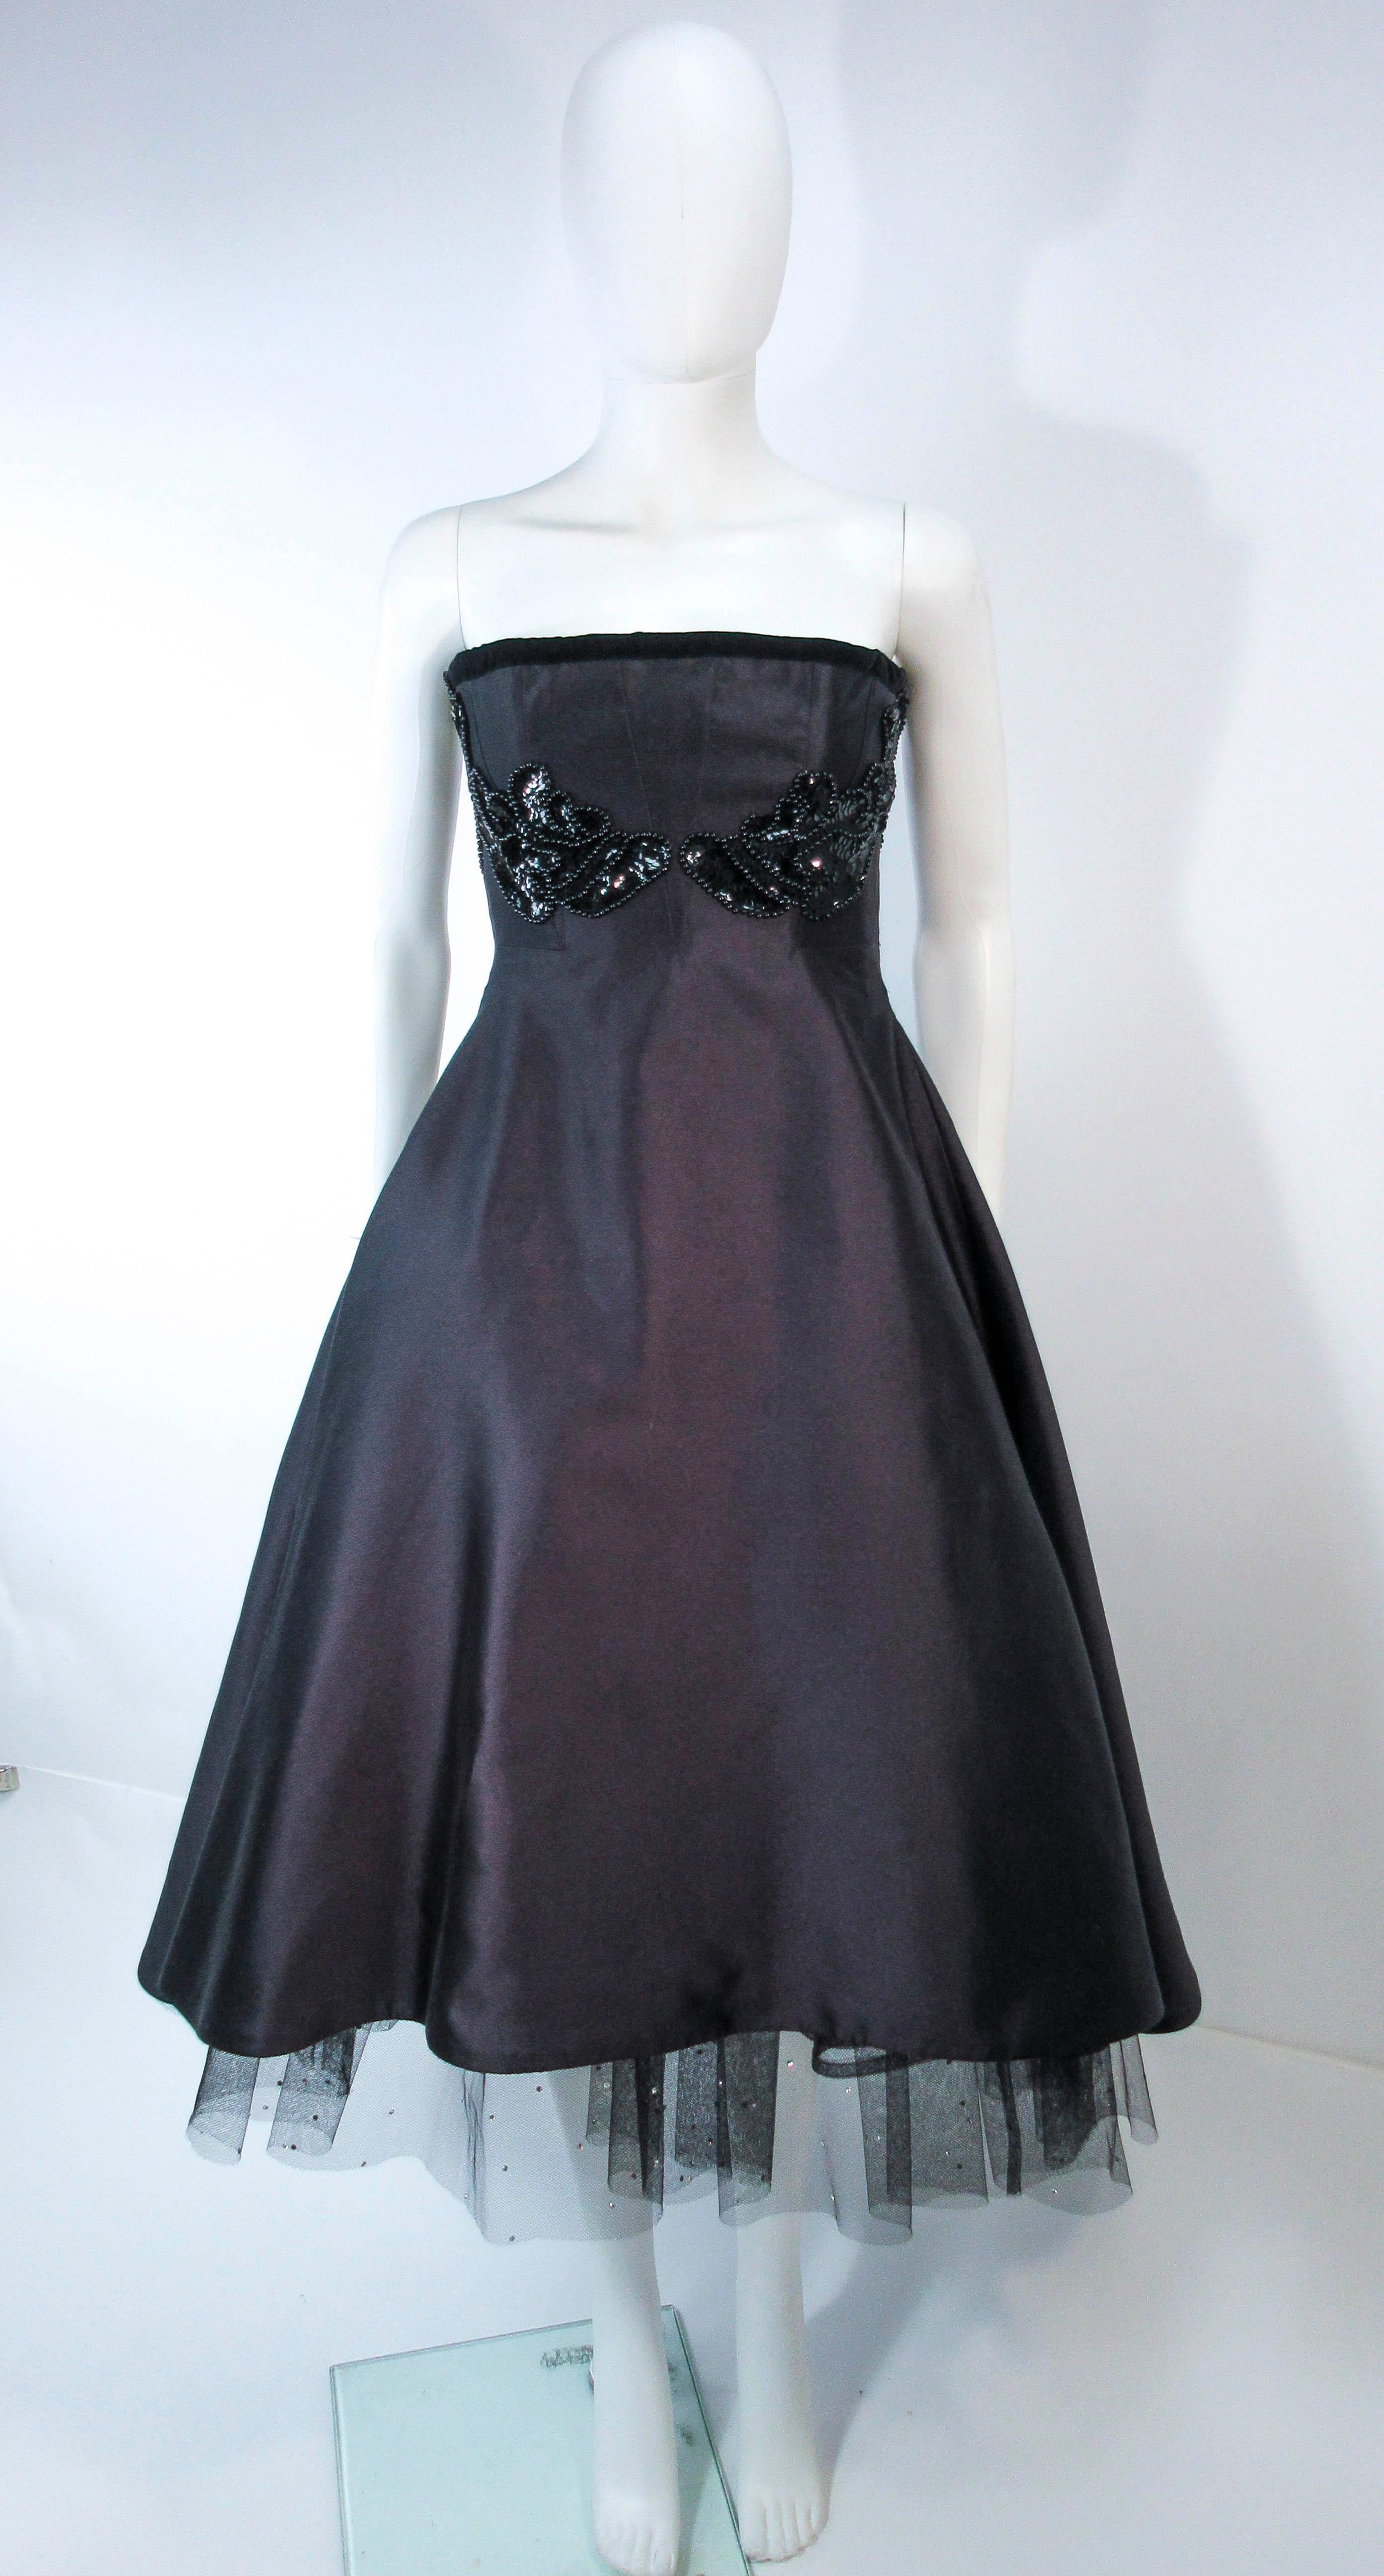 This Elizabeth Mason Couture design is a vintage redesign. The cocktail dress is composed of a black silk and features an interior bustier with boning. The crinoline features a splash of rhinestone embellishments for a fabulous pop. This one of a